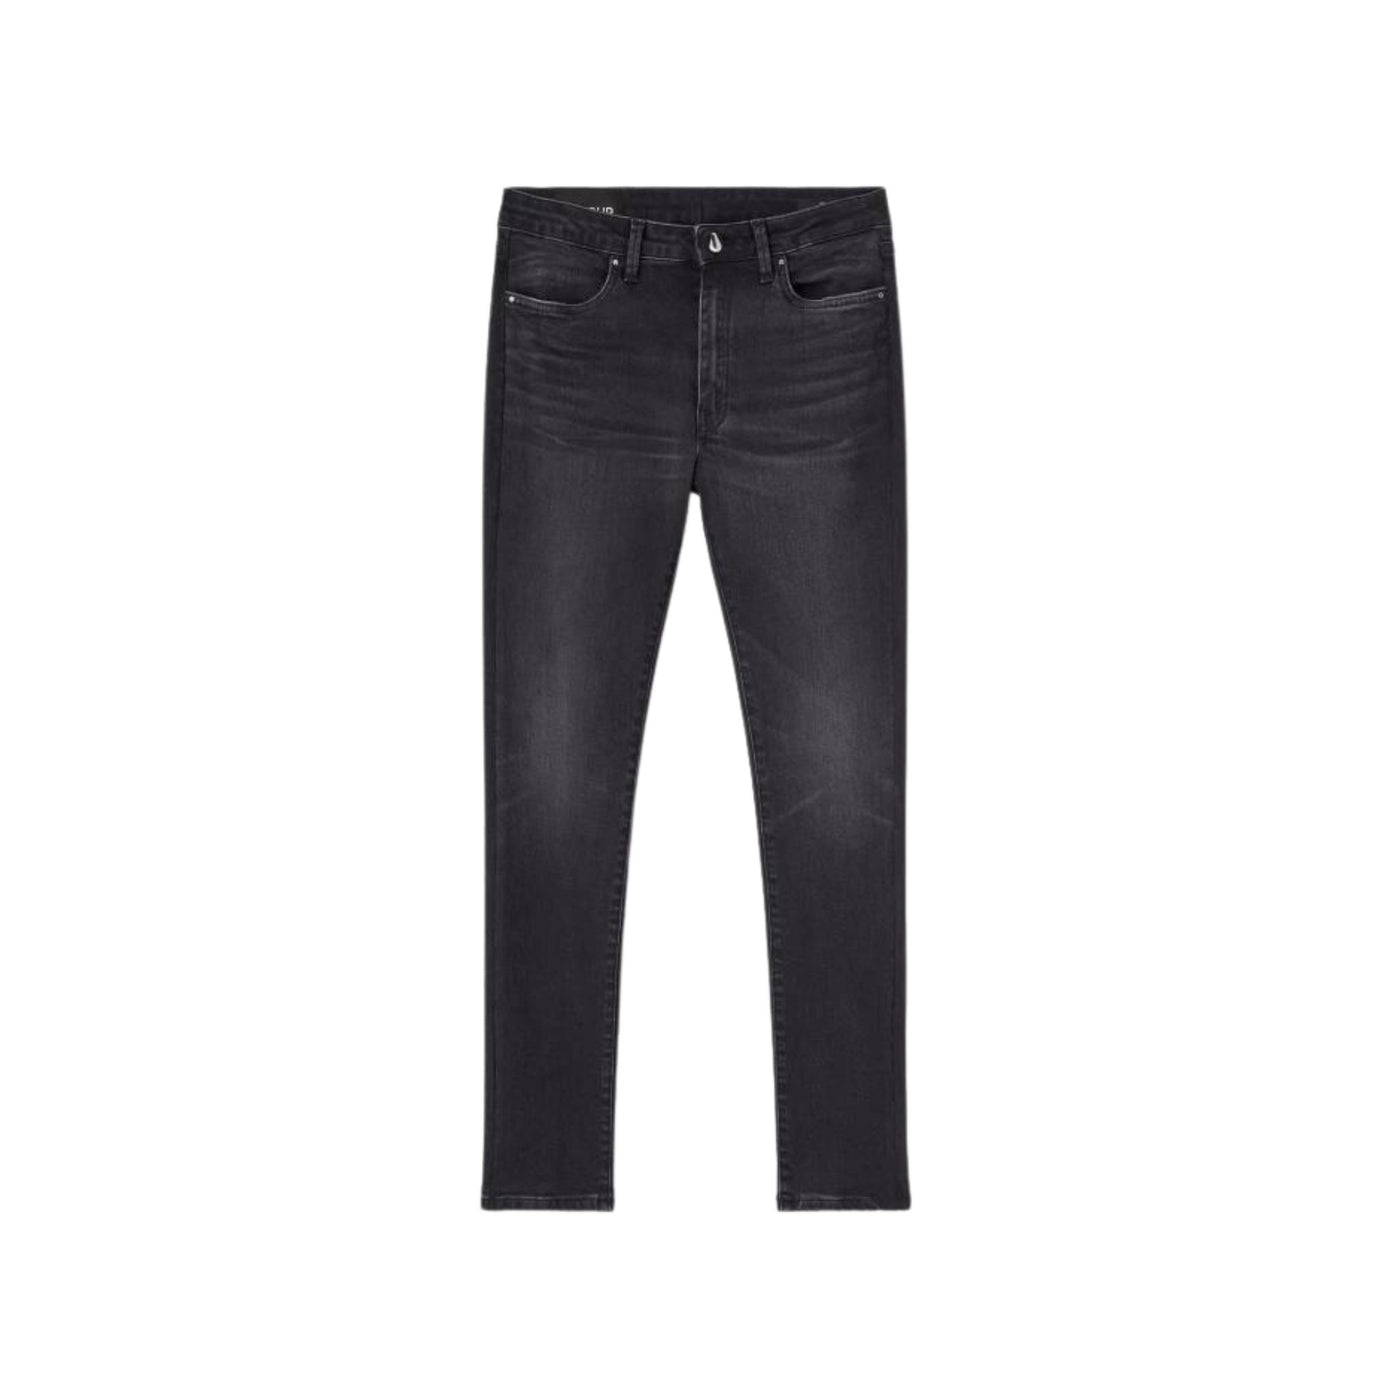 High-waisted women's jeans